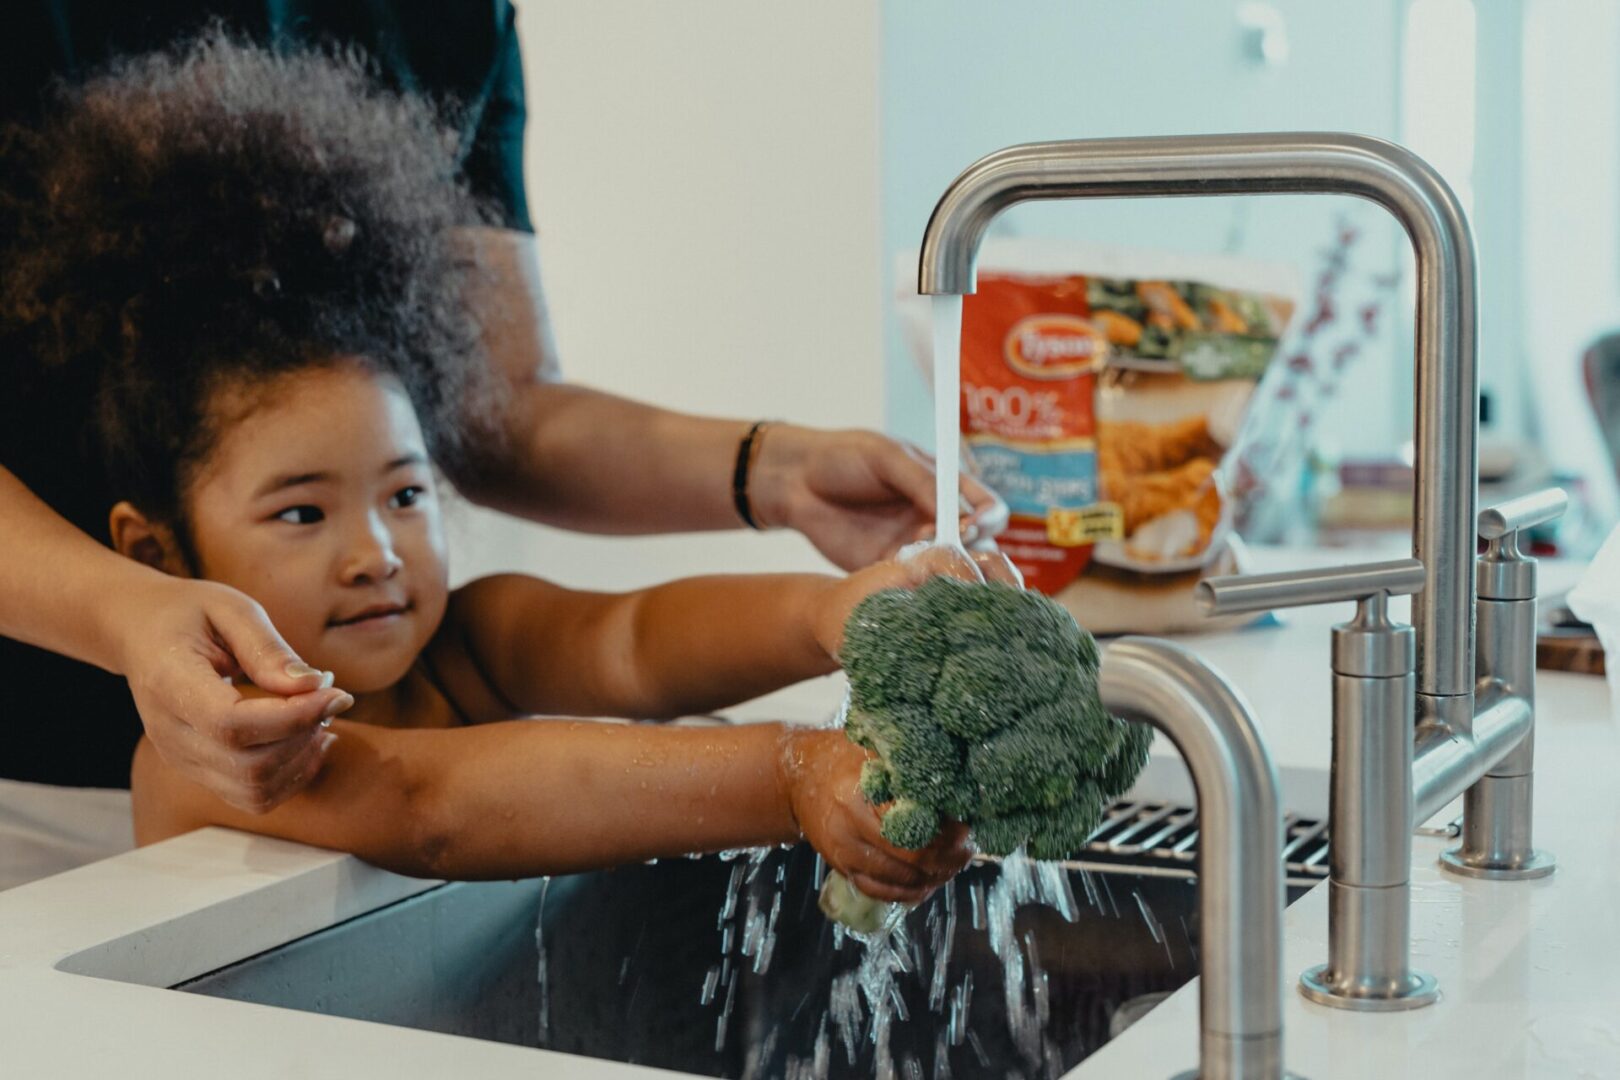 A child is washing broccoli in the sink.